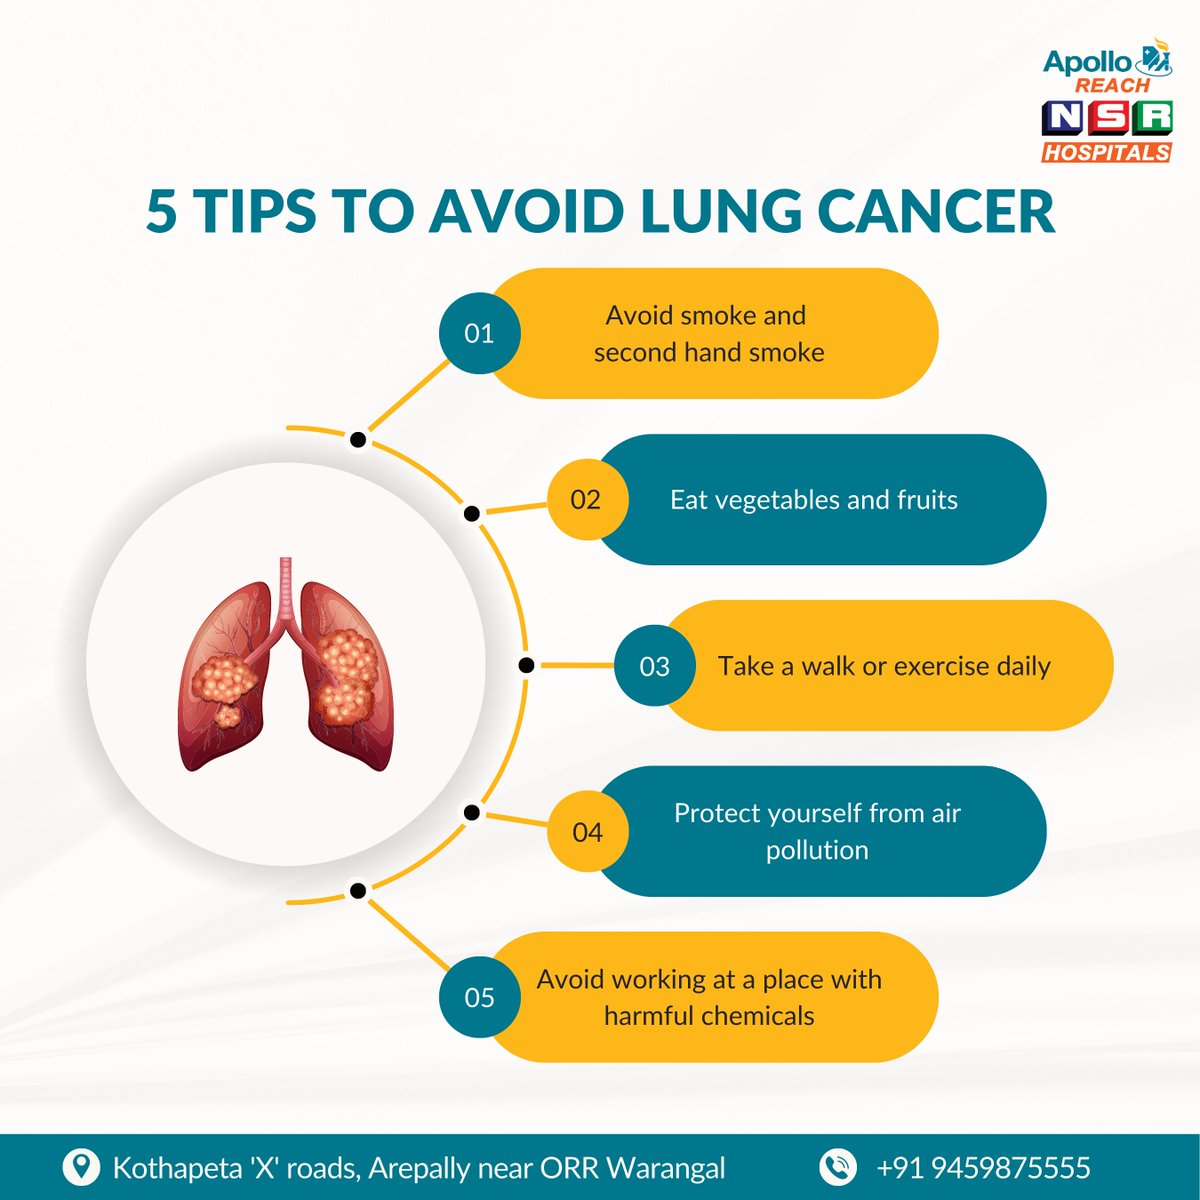 Lung cancer prevention is possible! Follow these 5 tips to reduce your risk. #ApolloReachNSRHospitals #LungCancerPrevention